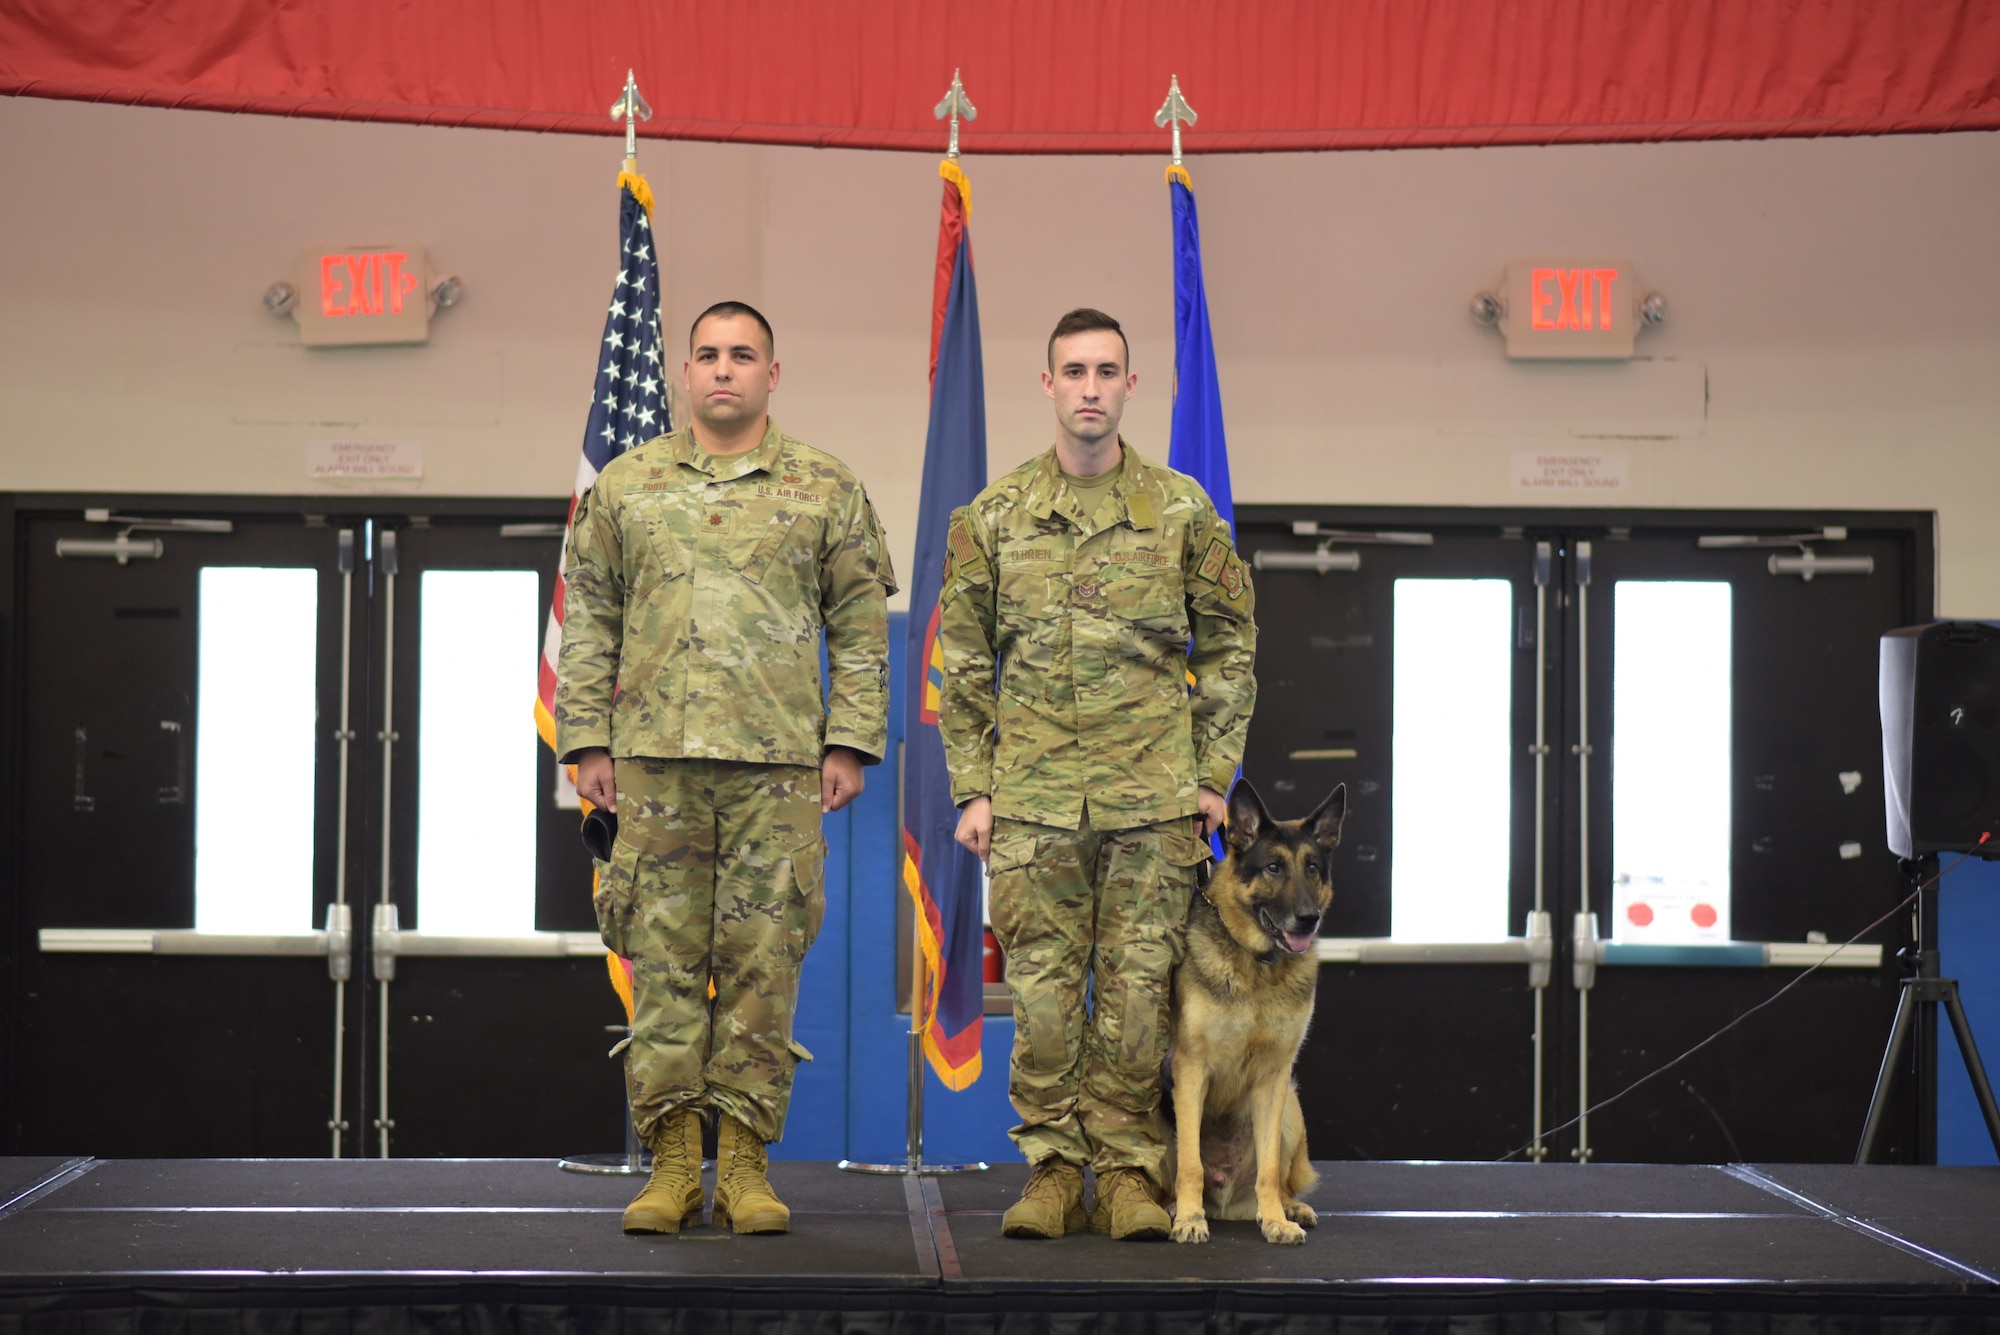 U.S. Air Force Staff Sgt. Alexander O'Brien, 36th Security Forces Squadron Military Working Dog handler, escorts MWD Pedro during a retirement ceremony at Andersen Air Force Base, Guam on March 23, 2022. The ceremony recognized four MWD's with a combined 29 years of service. (U.S. Air Force photo by Airman 1st Class Emily Saxton)